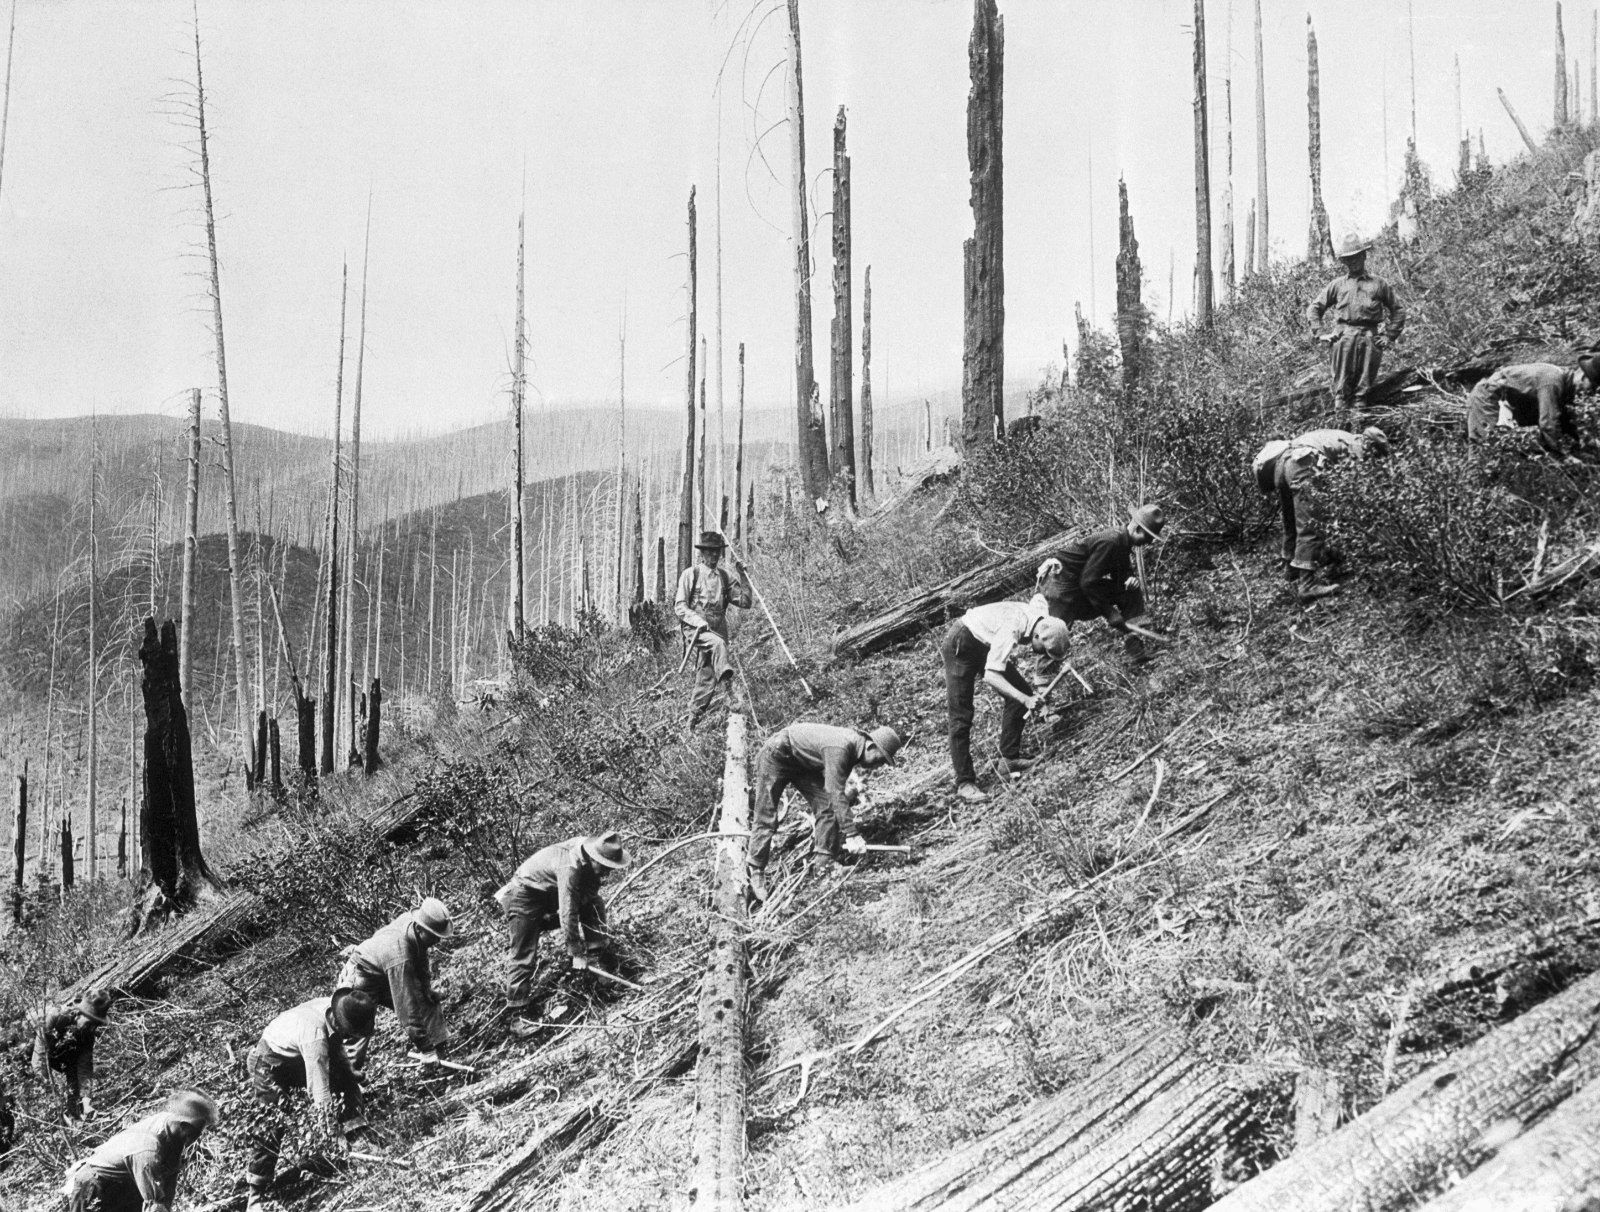 A black and white photo of people leaning over to plant trees.